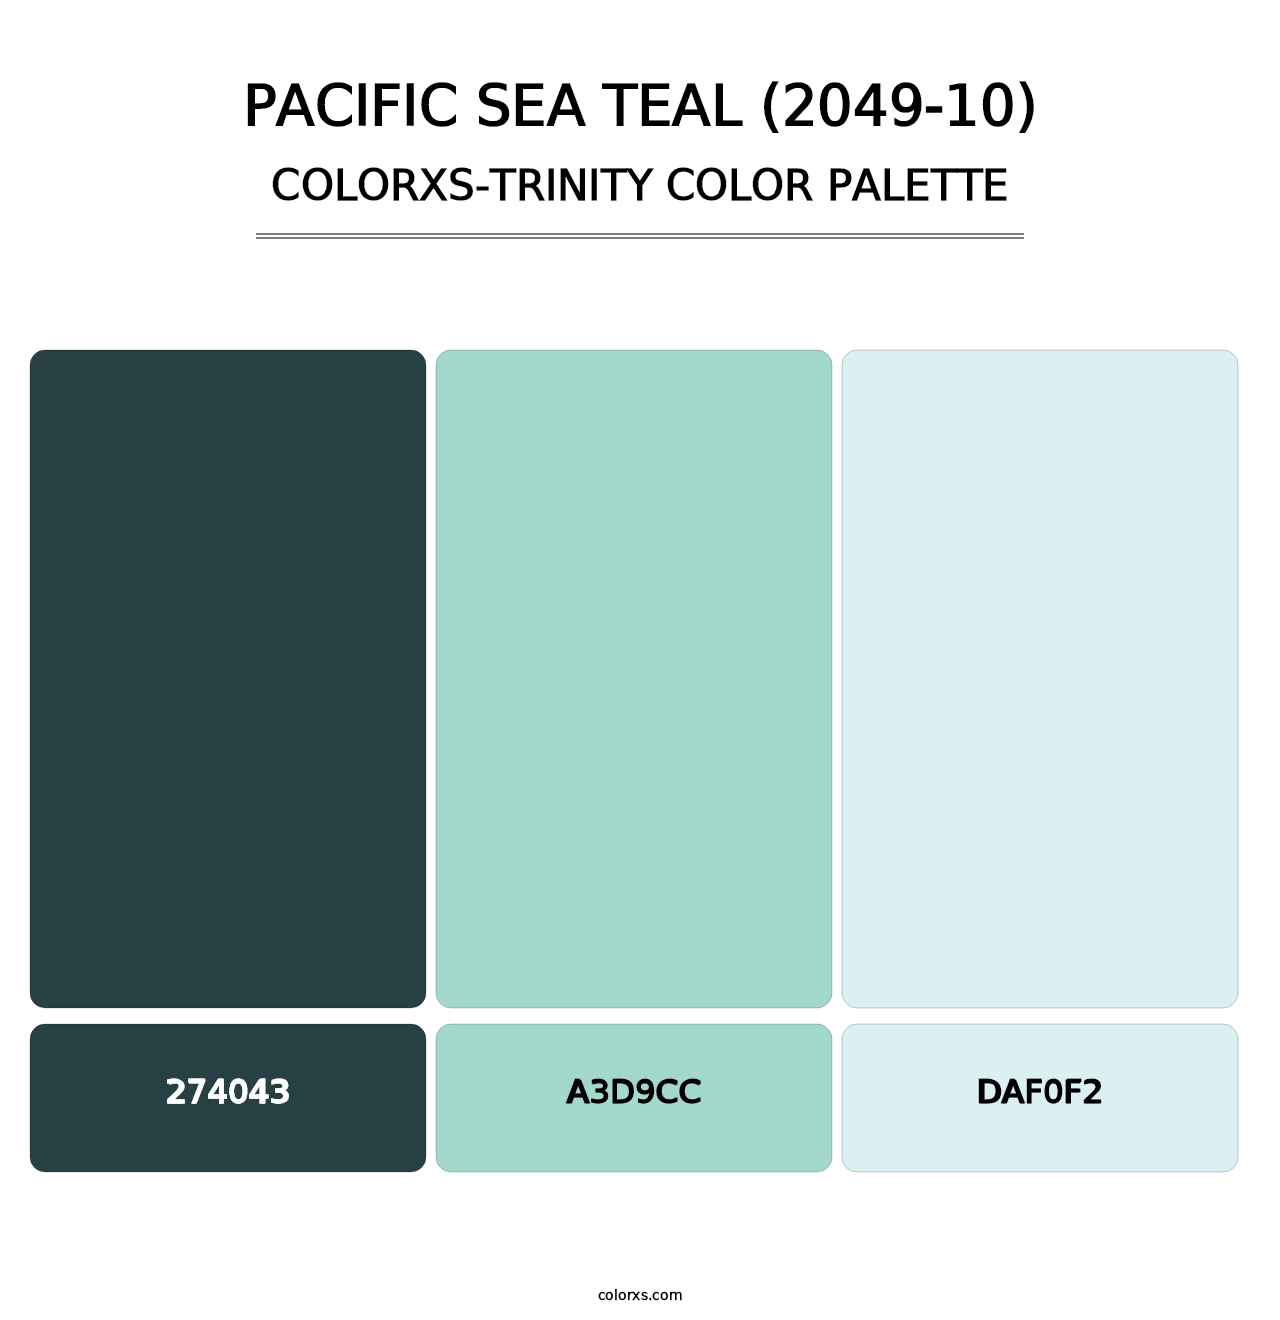 Pacific Sea Teal (2049-10) - Colorxs Trinity Palette